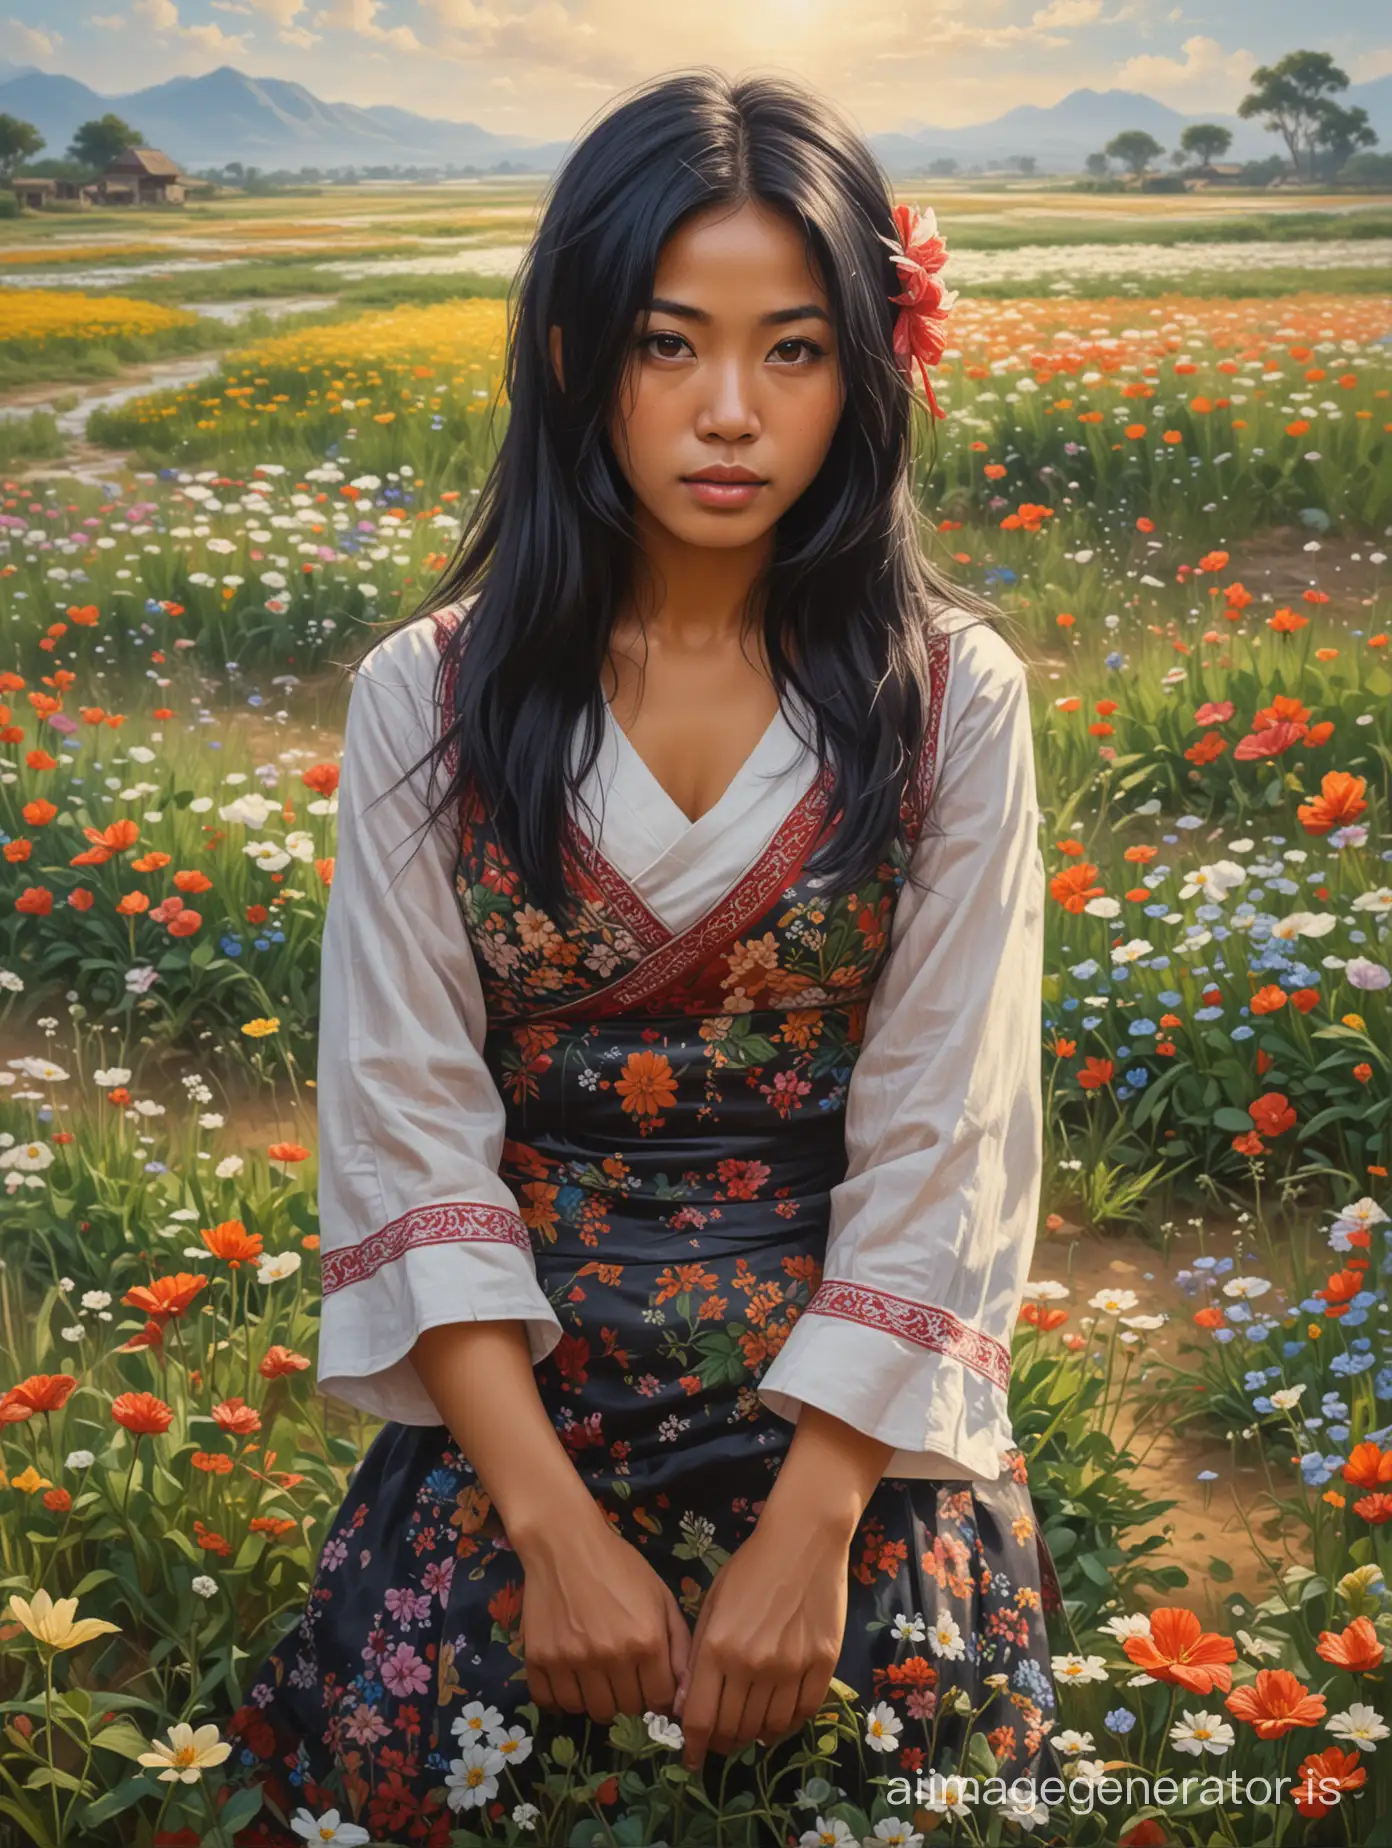 Tranquil-Vietnamese-Maid-Amidst-Blossoming-Fields